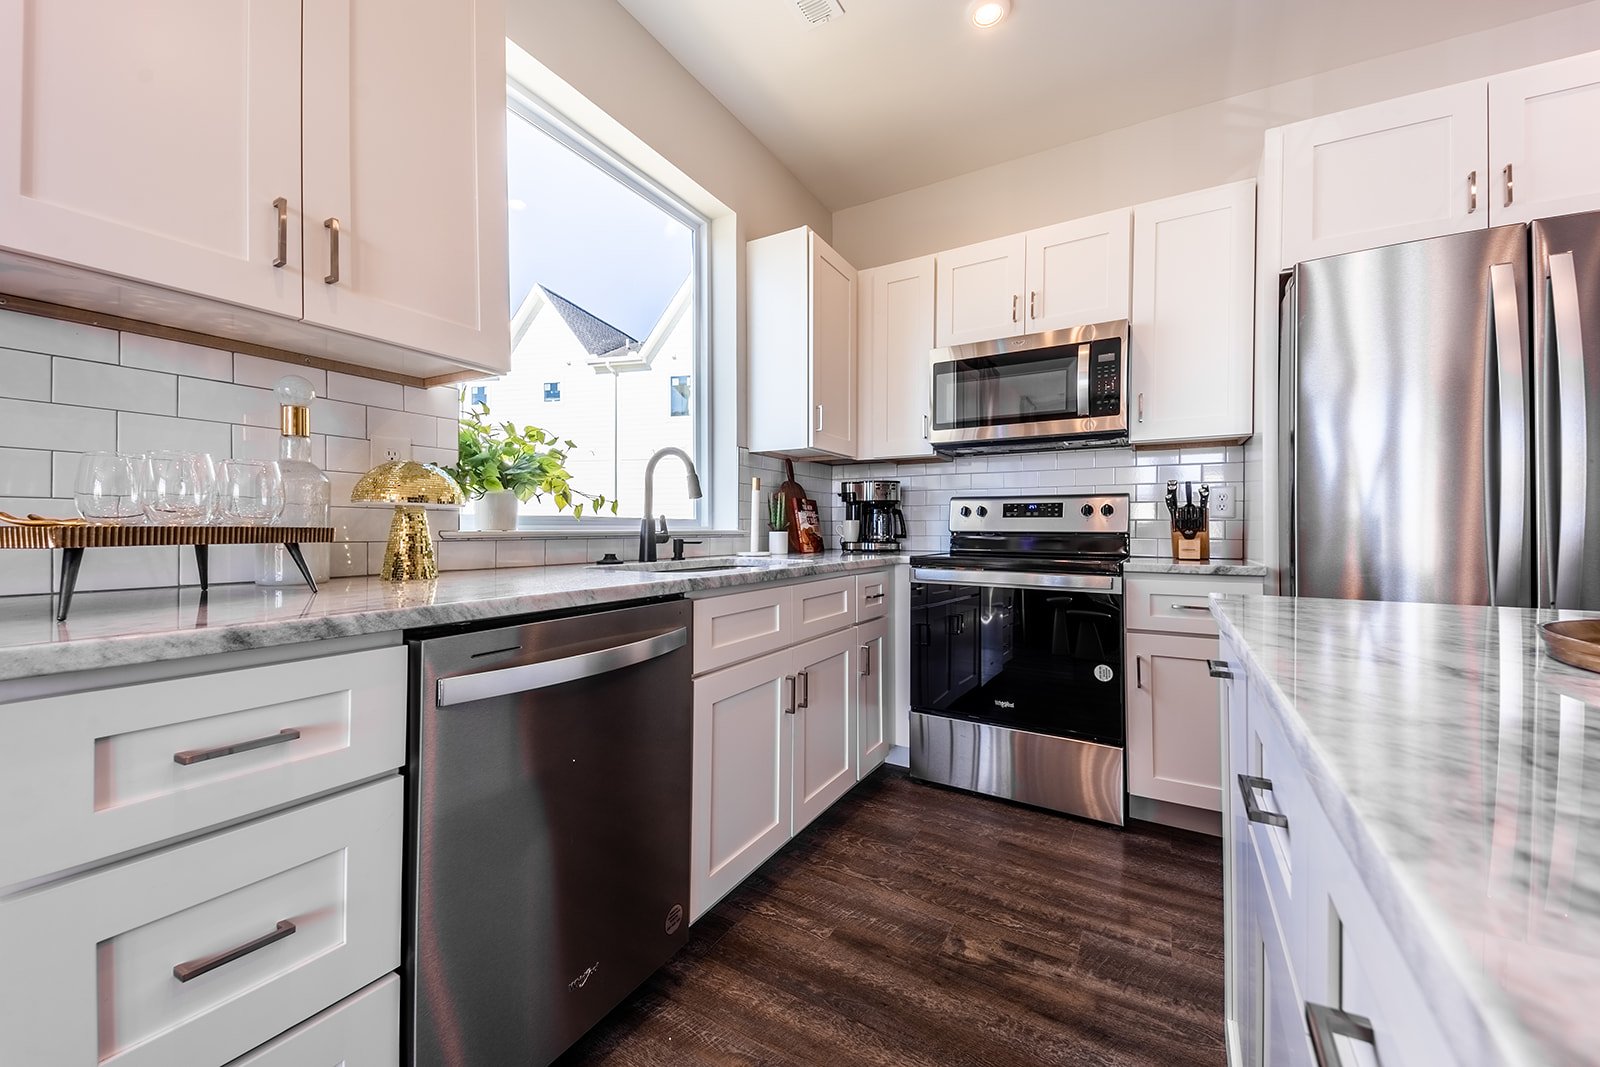 Fully Equipped Kitchen stocked with your basic cooking essentials and stainless-steel appliances. (2nd Floor)